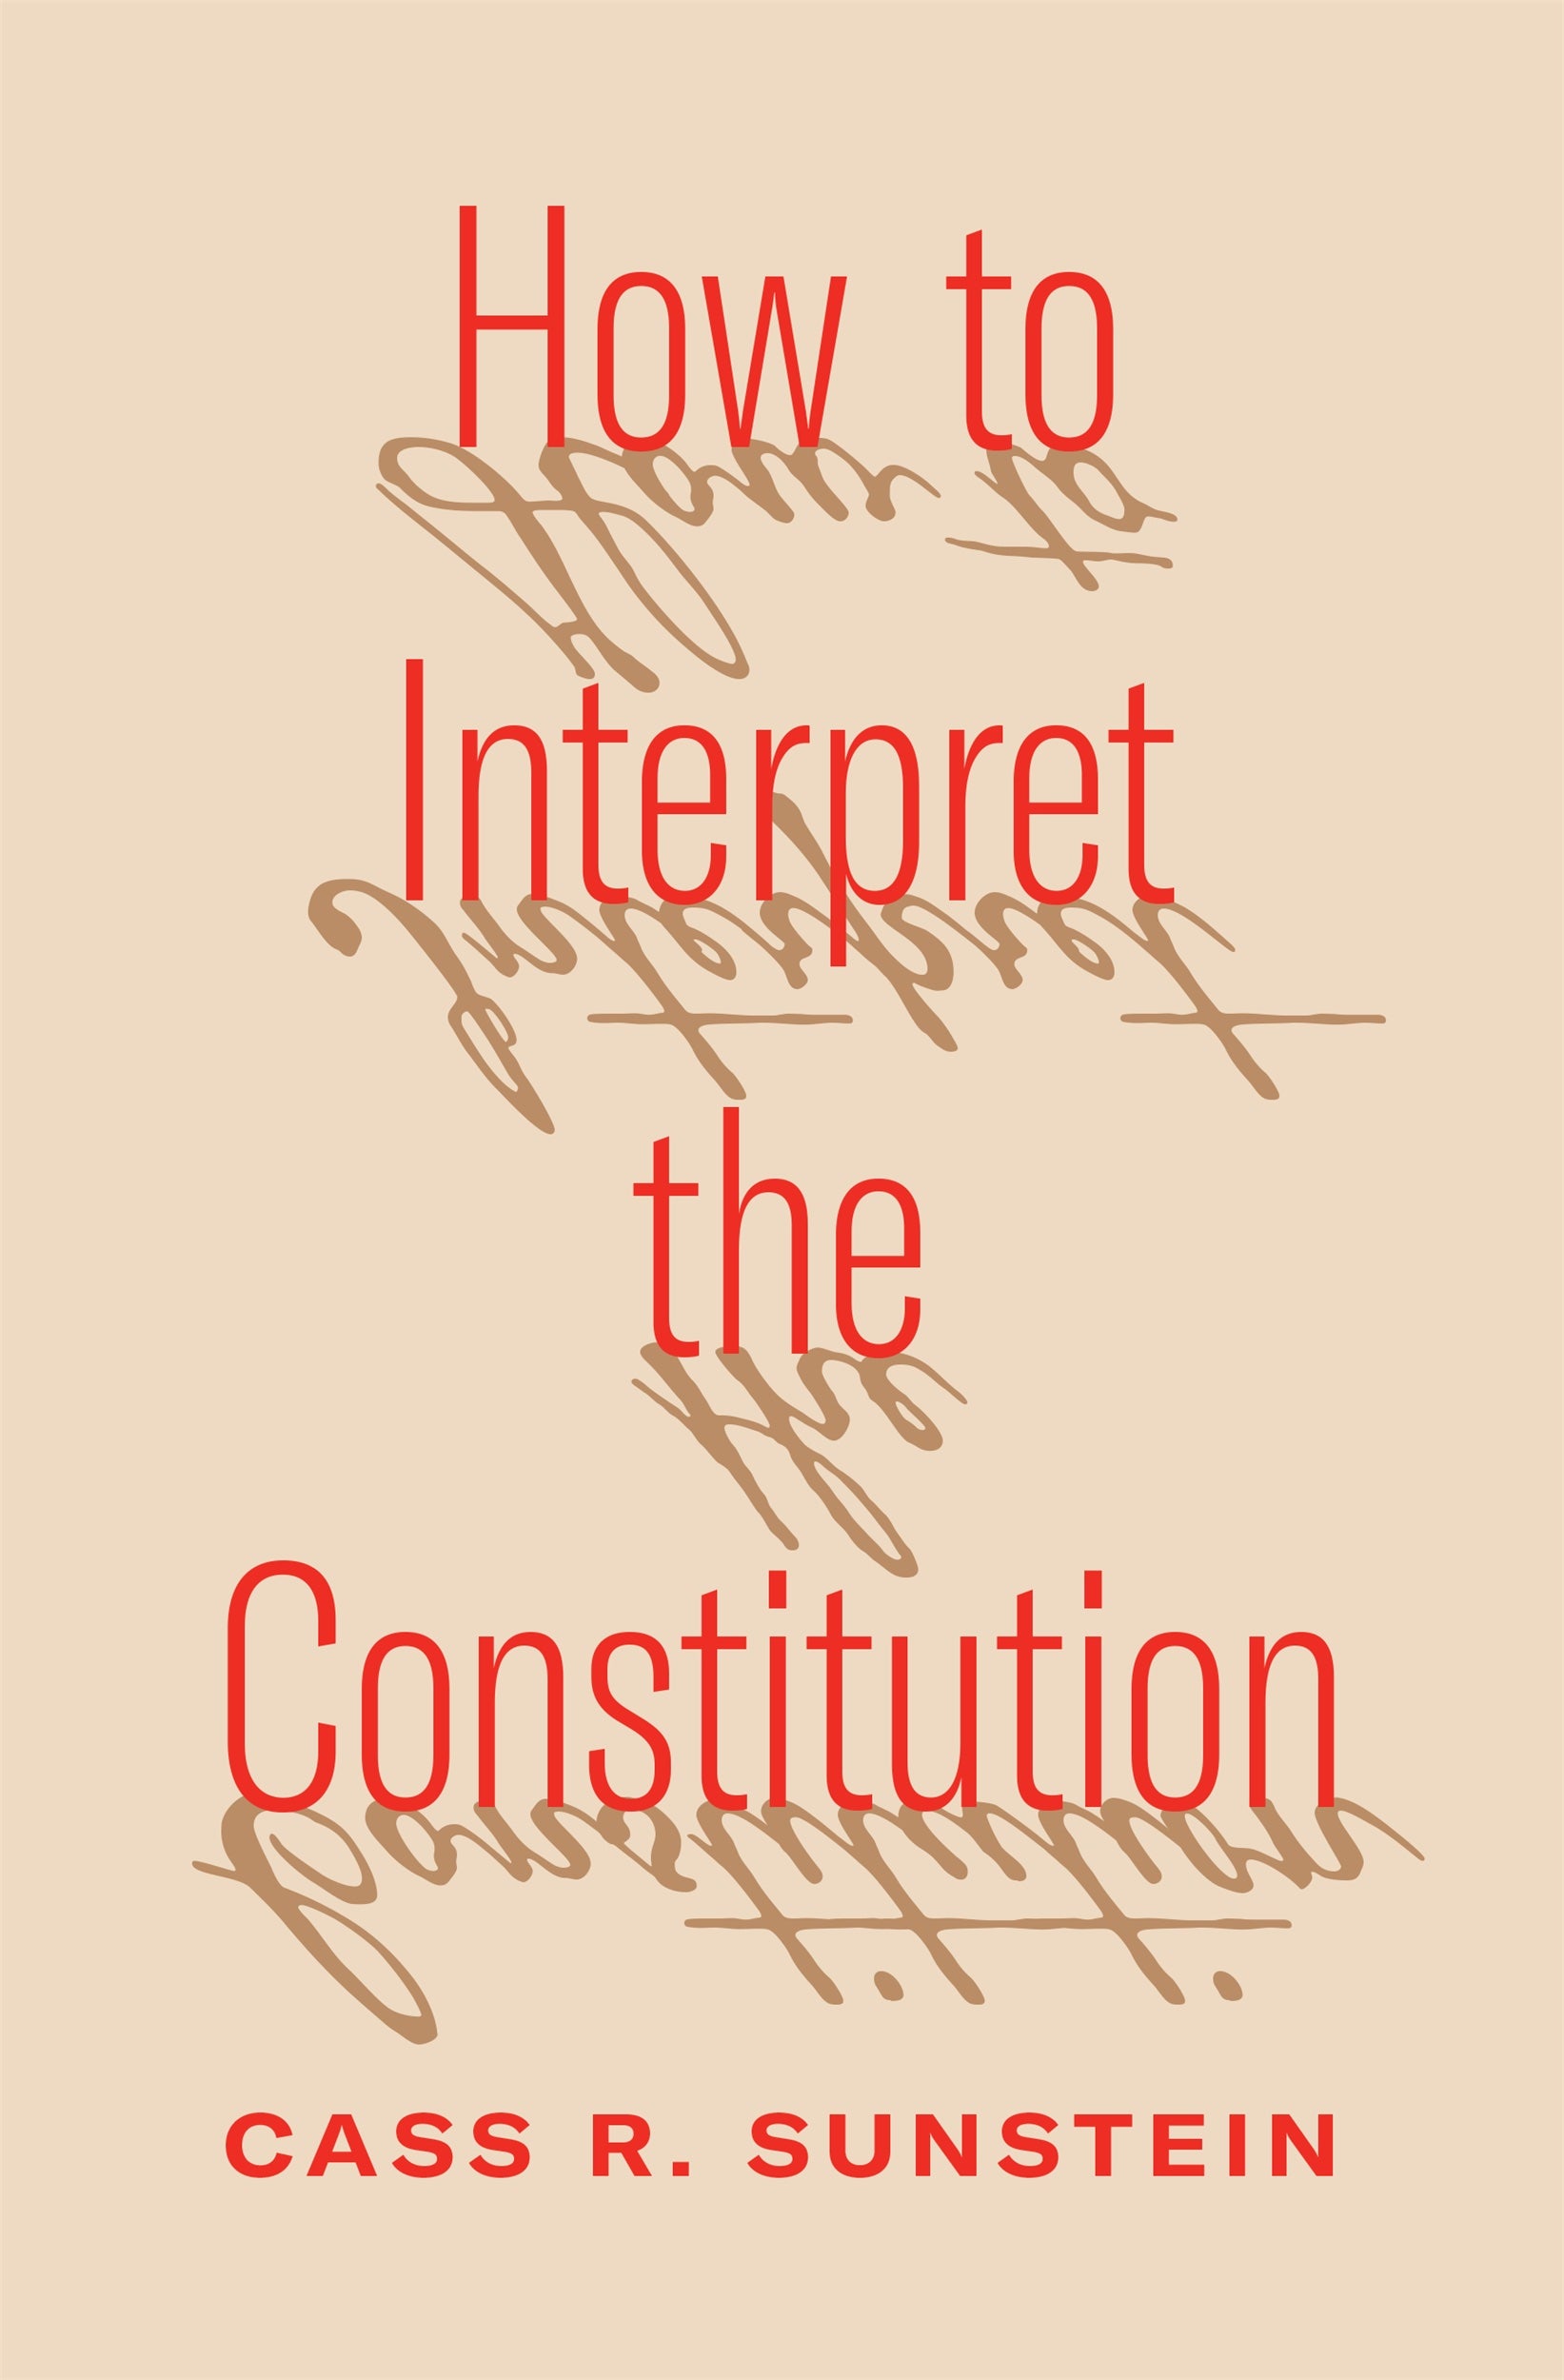 Book cover for How to Interpret the Constitution by Cass R. Sunstein. Red sans serif title with cursive mirrored text on a beige background.